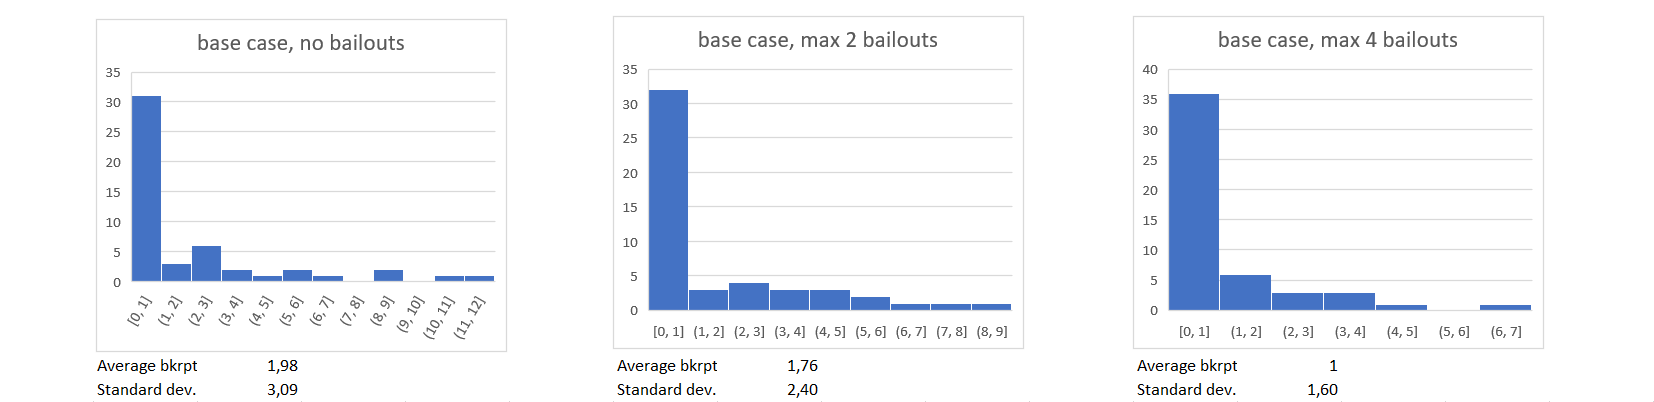 Bailouts.png